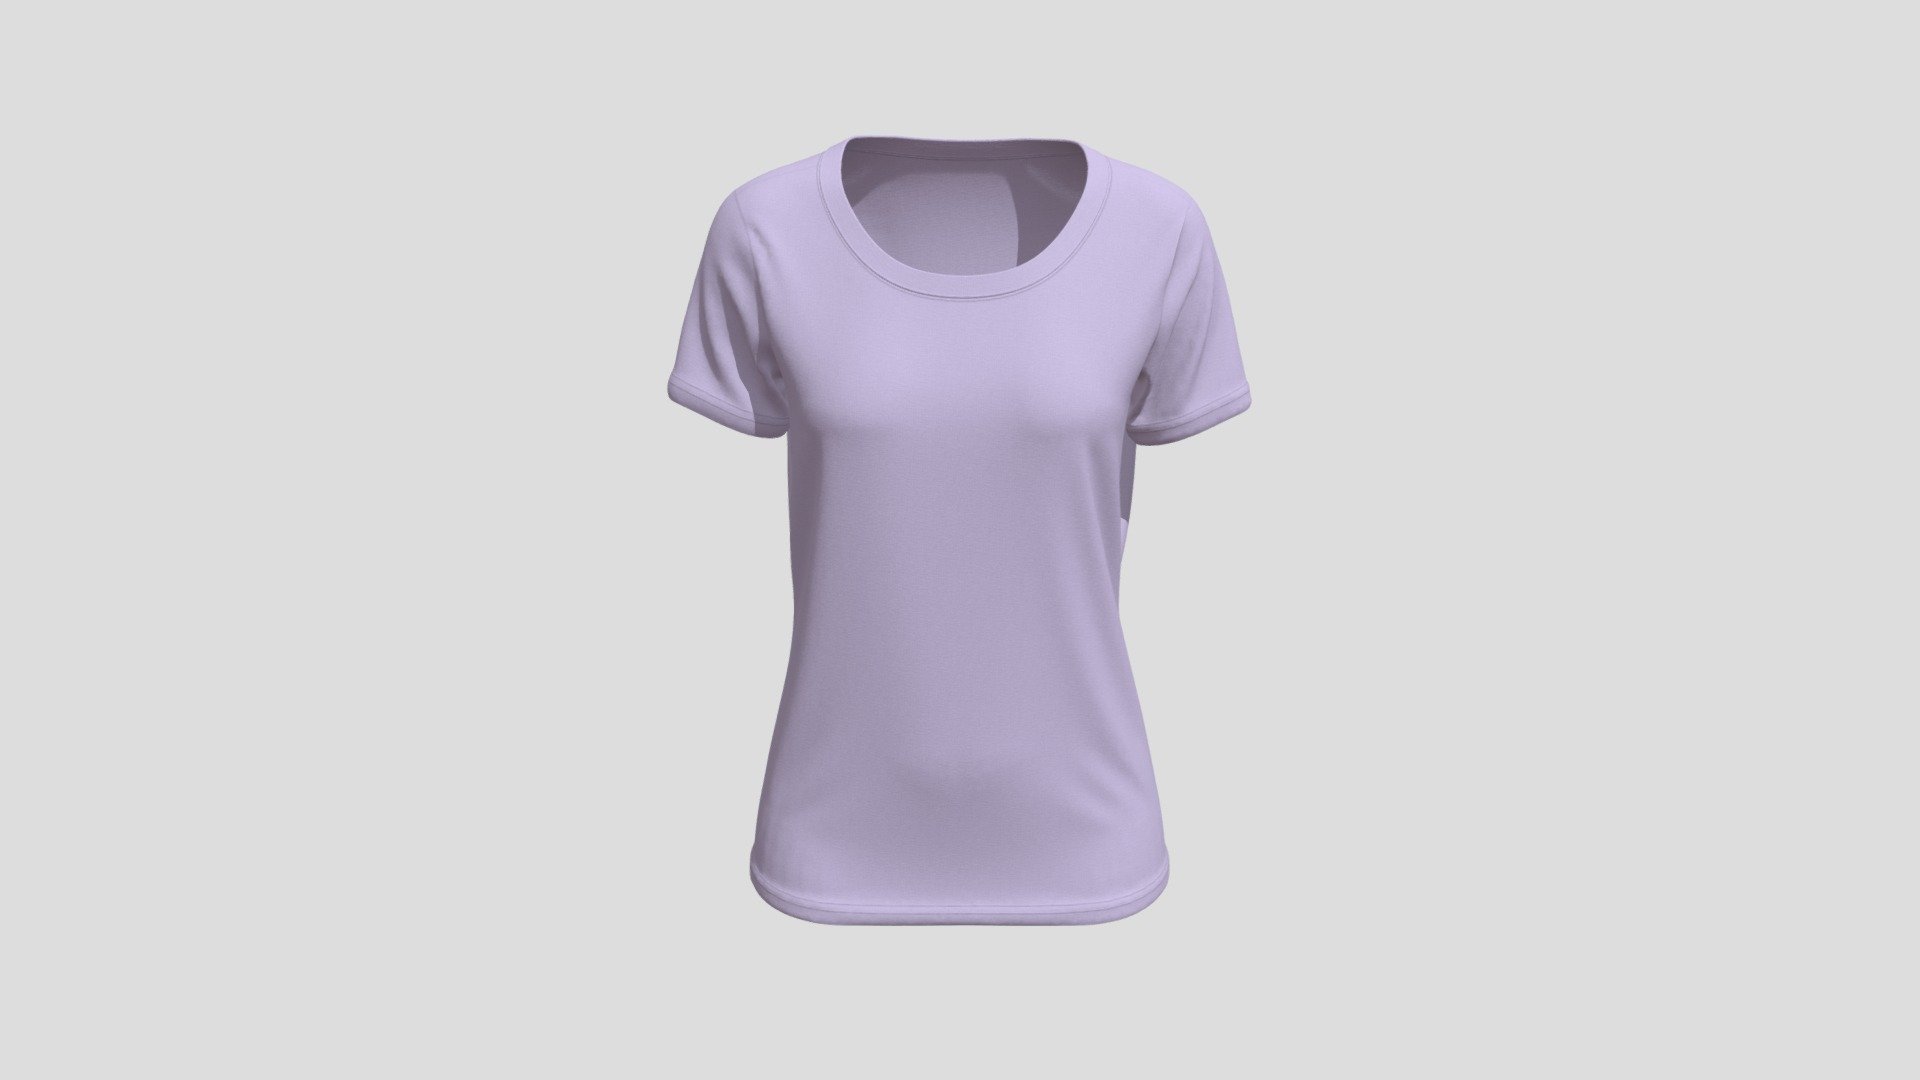 Cloth Title = Modern Boatneck Short sleeve t-shirt women 

SKU = DG100149 

Category = Women 

Product Type = T-Shirt 

Cloth Length = Regular 

Body Fit = Regular Fit 

Occasion = Casual 
 
Sleeve Style = Set In Sleeve 


Our Services:

3D Apparel Design.

OBJ,FBX,GLTF Making with High/Low Poly.

Fabric Digitalization.

Mockup making.

3D Teck Pack.

Pattern Making.

2D Illustration.

Cloth Animation and 360 Spin Video.


Contact us:- 

Email: info@digitalfashionwear.com 

Website: https://digitalfashionwear.com 


We designed all the types of cloth specially focused on product visualization, e-commerce, fitting, and production. 

We will design: 

T-shirts 

Polo shirts 

Hoodies 

Sweatshirt 

Jackets 

Shirts 

TankTops 

Trousers 

Bras 

Underwear 

Blazer 

Aprons 

Leggings 

and All Fashion items. 





Our goal is to make sure what we provide you, meets your demand 3d model